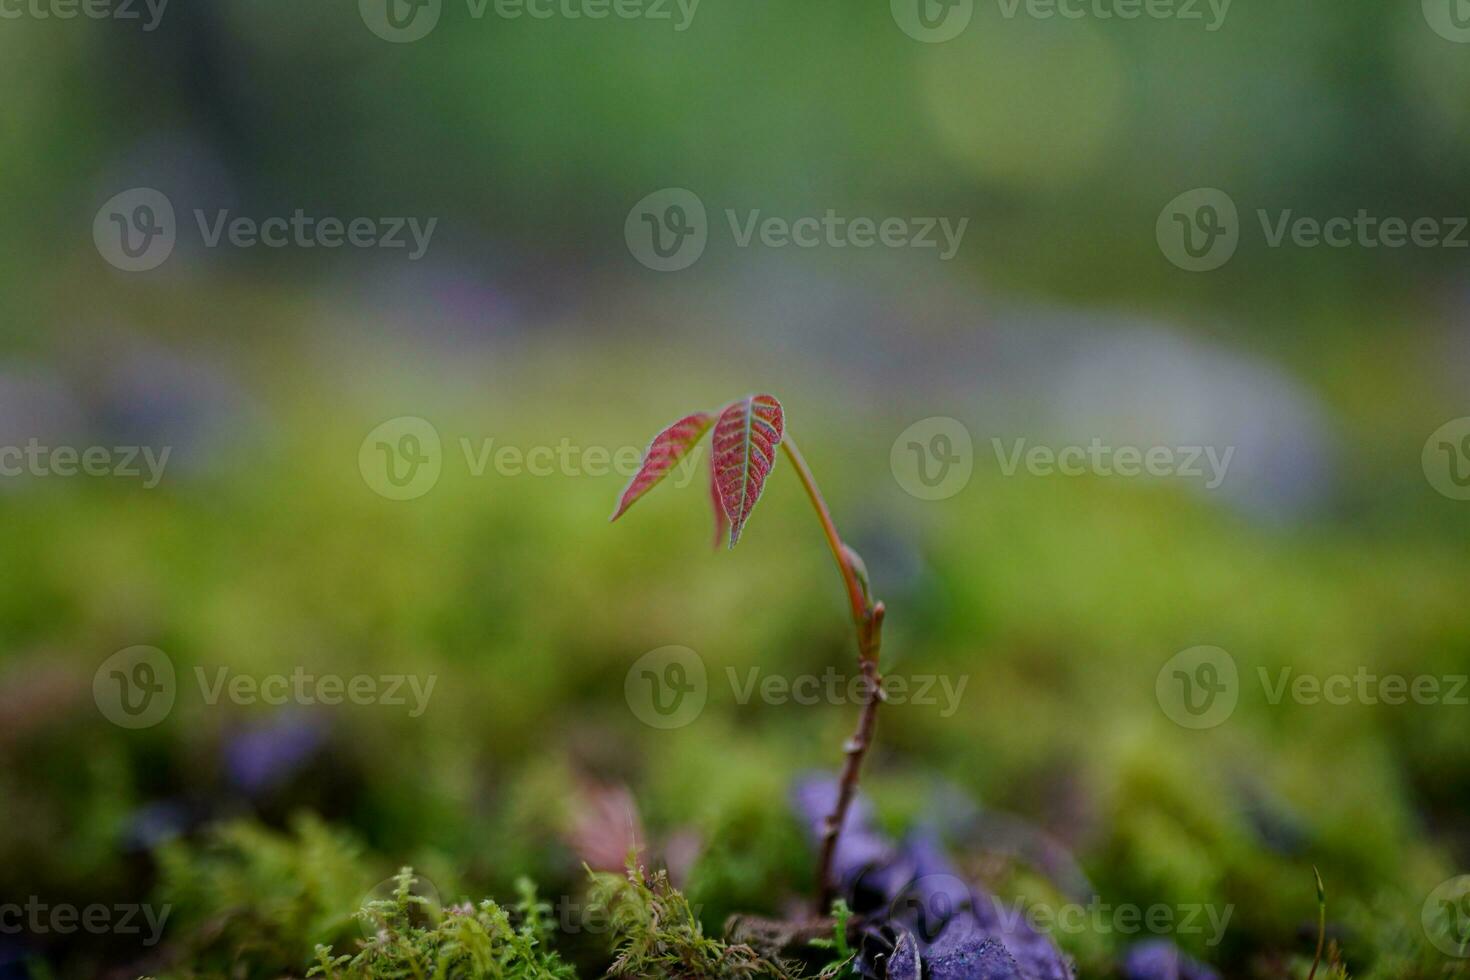 Baby Tree sapling emerging from it's seed on a moss covered forest floor photo